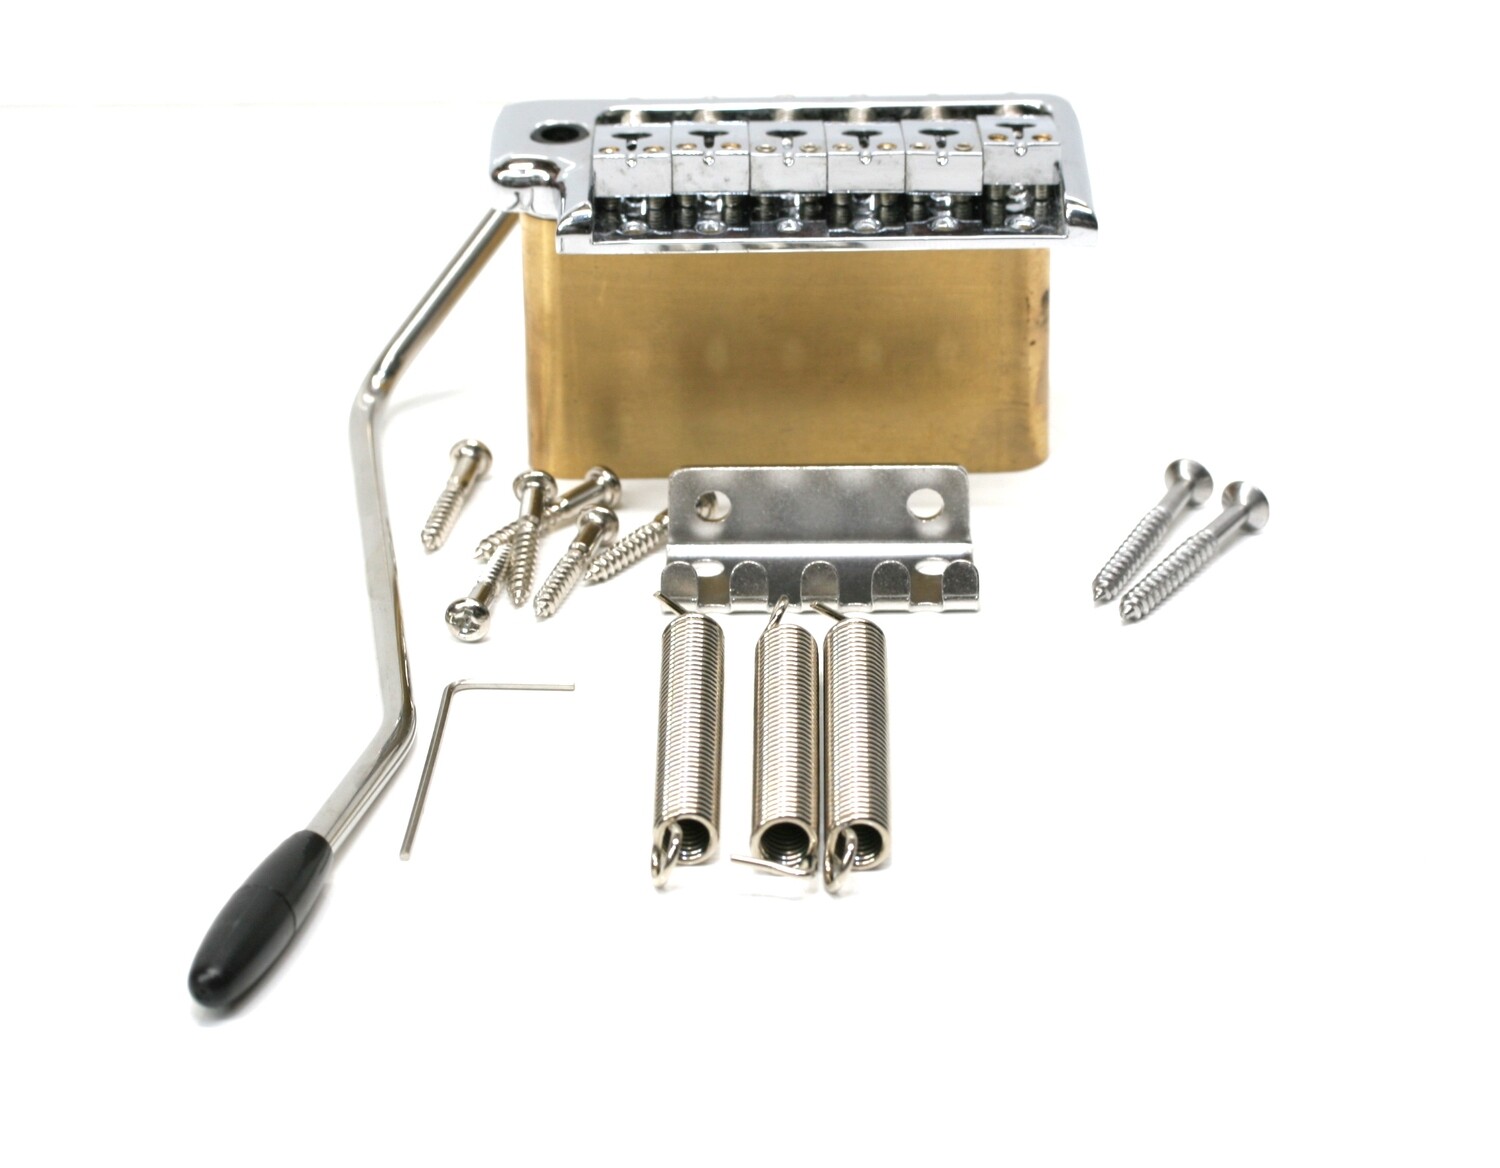 Brio Stainless Steel Saddles, Solid Brass Block 2 1/8th (53mm) String spacing Tremolo Chrome